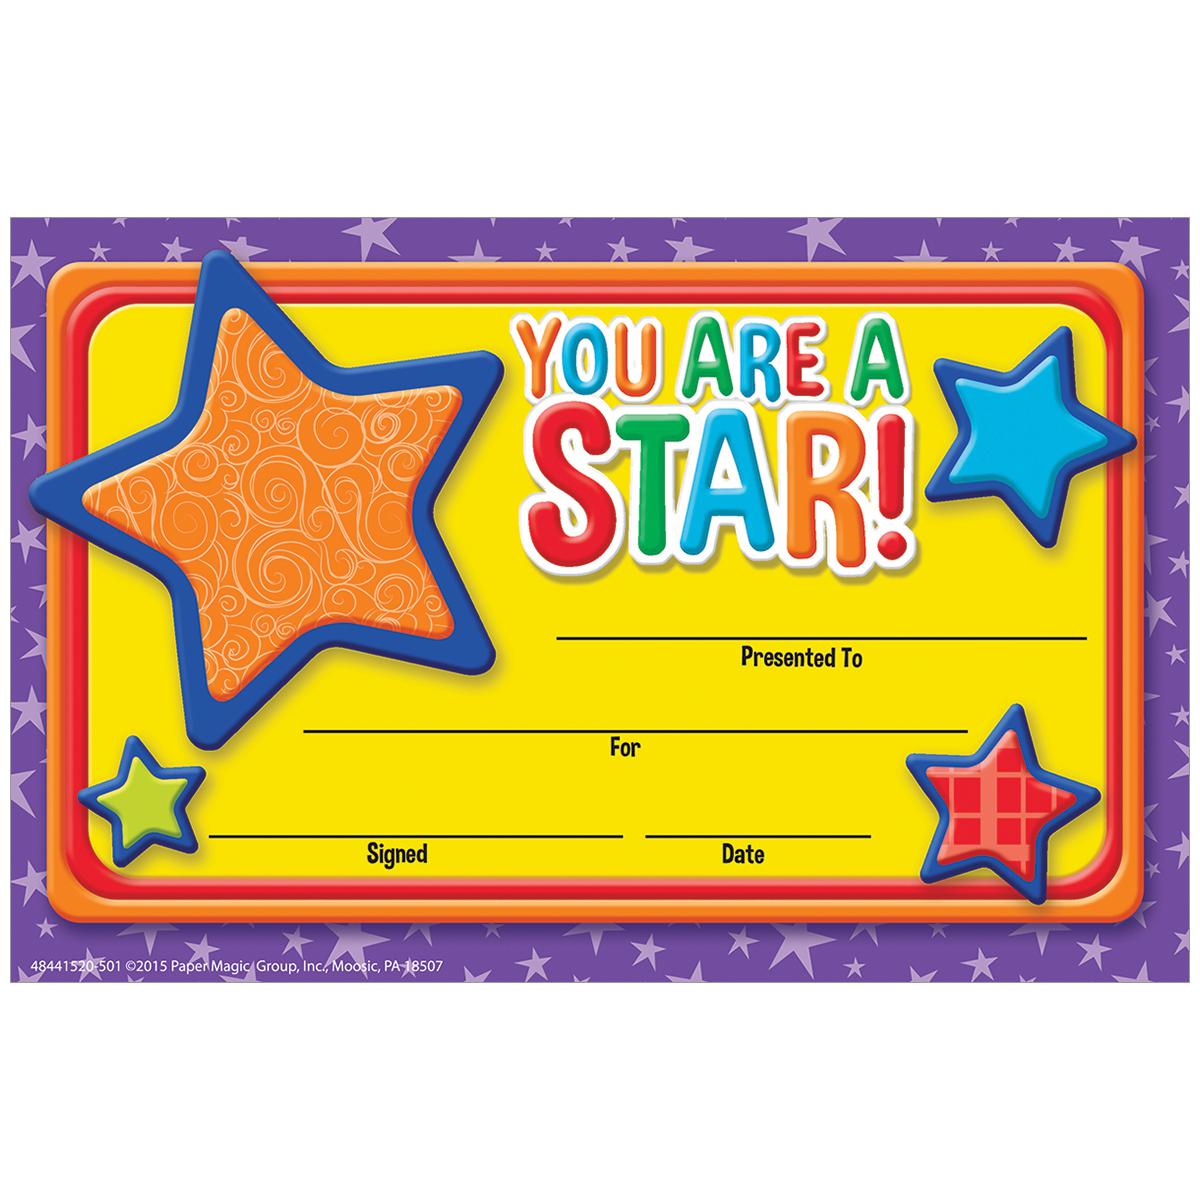  You Are A Star! Award 